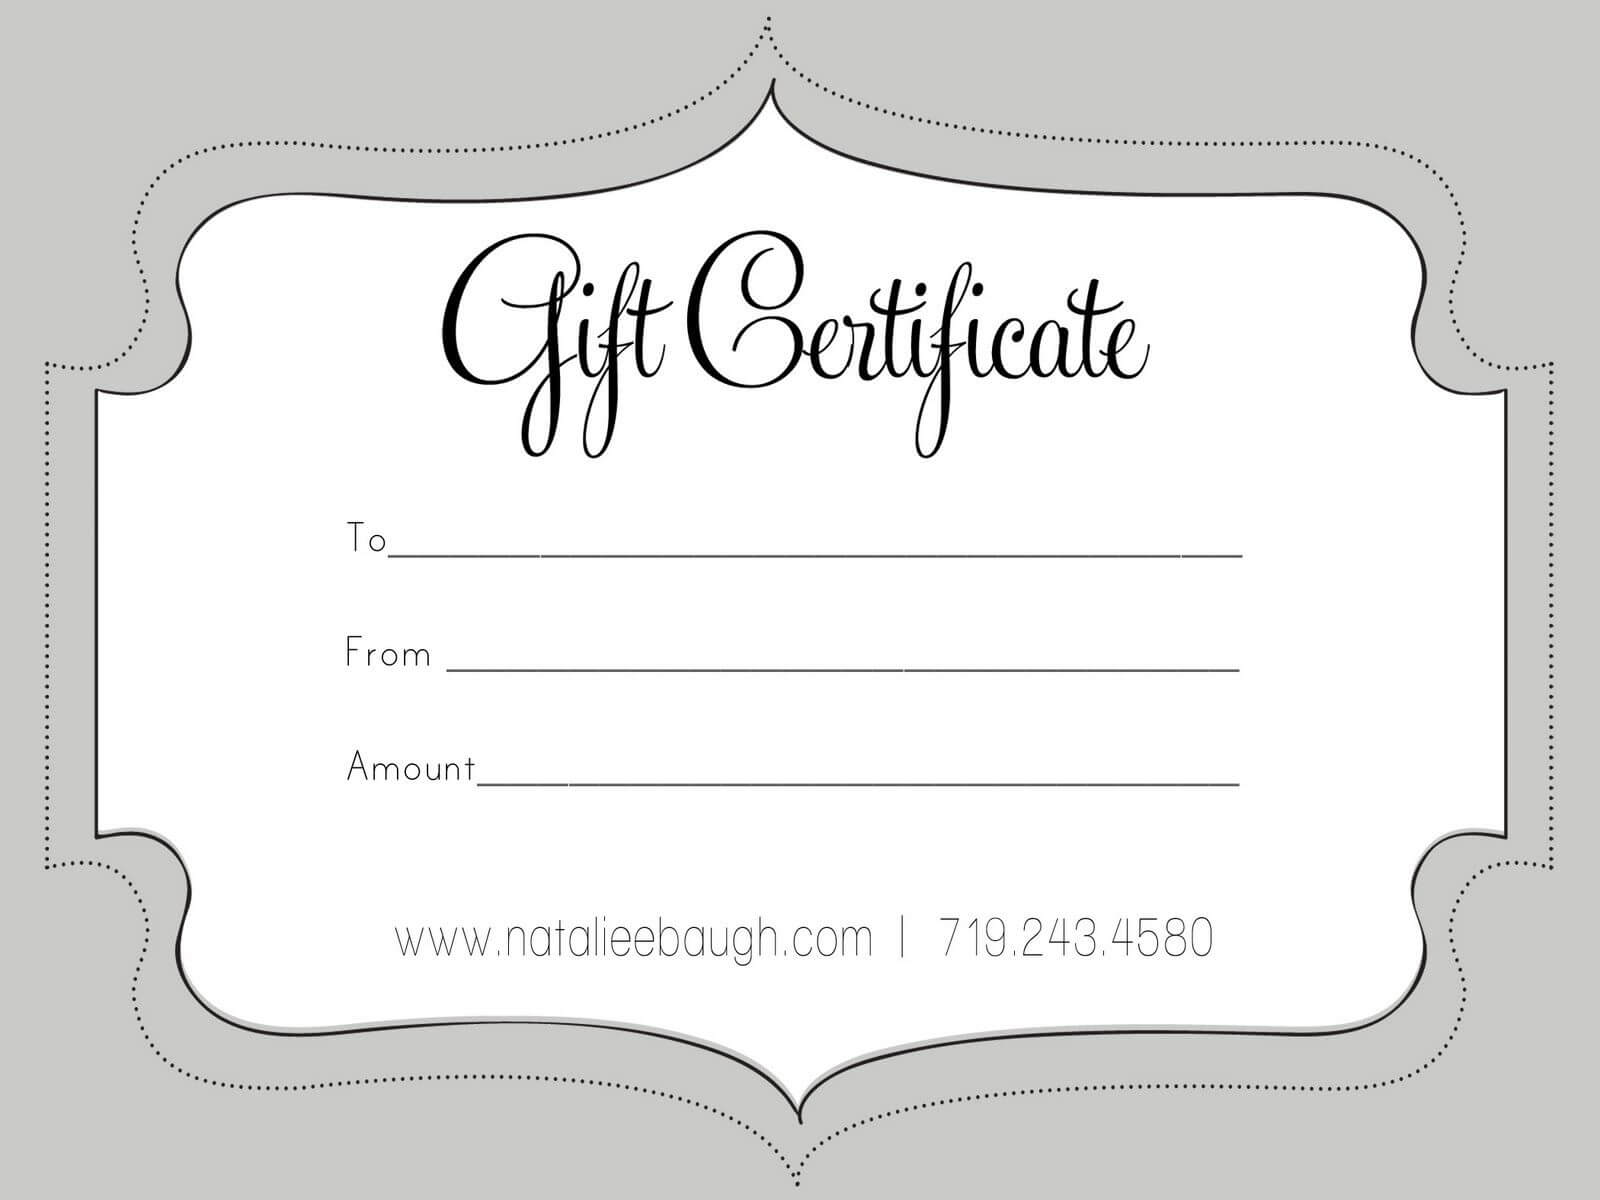 A Cute Looking Gift Certificate | S P A | Gift Certificate In Dinner Certificate Template Free